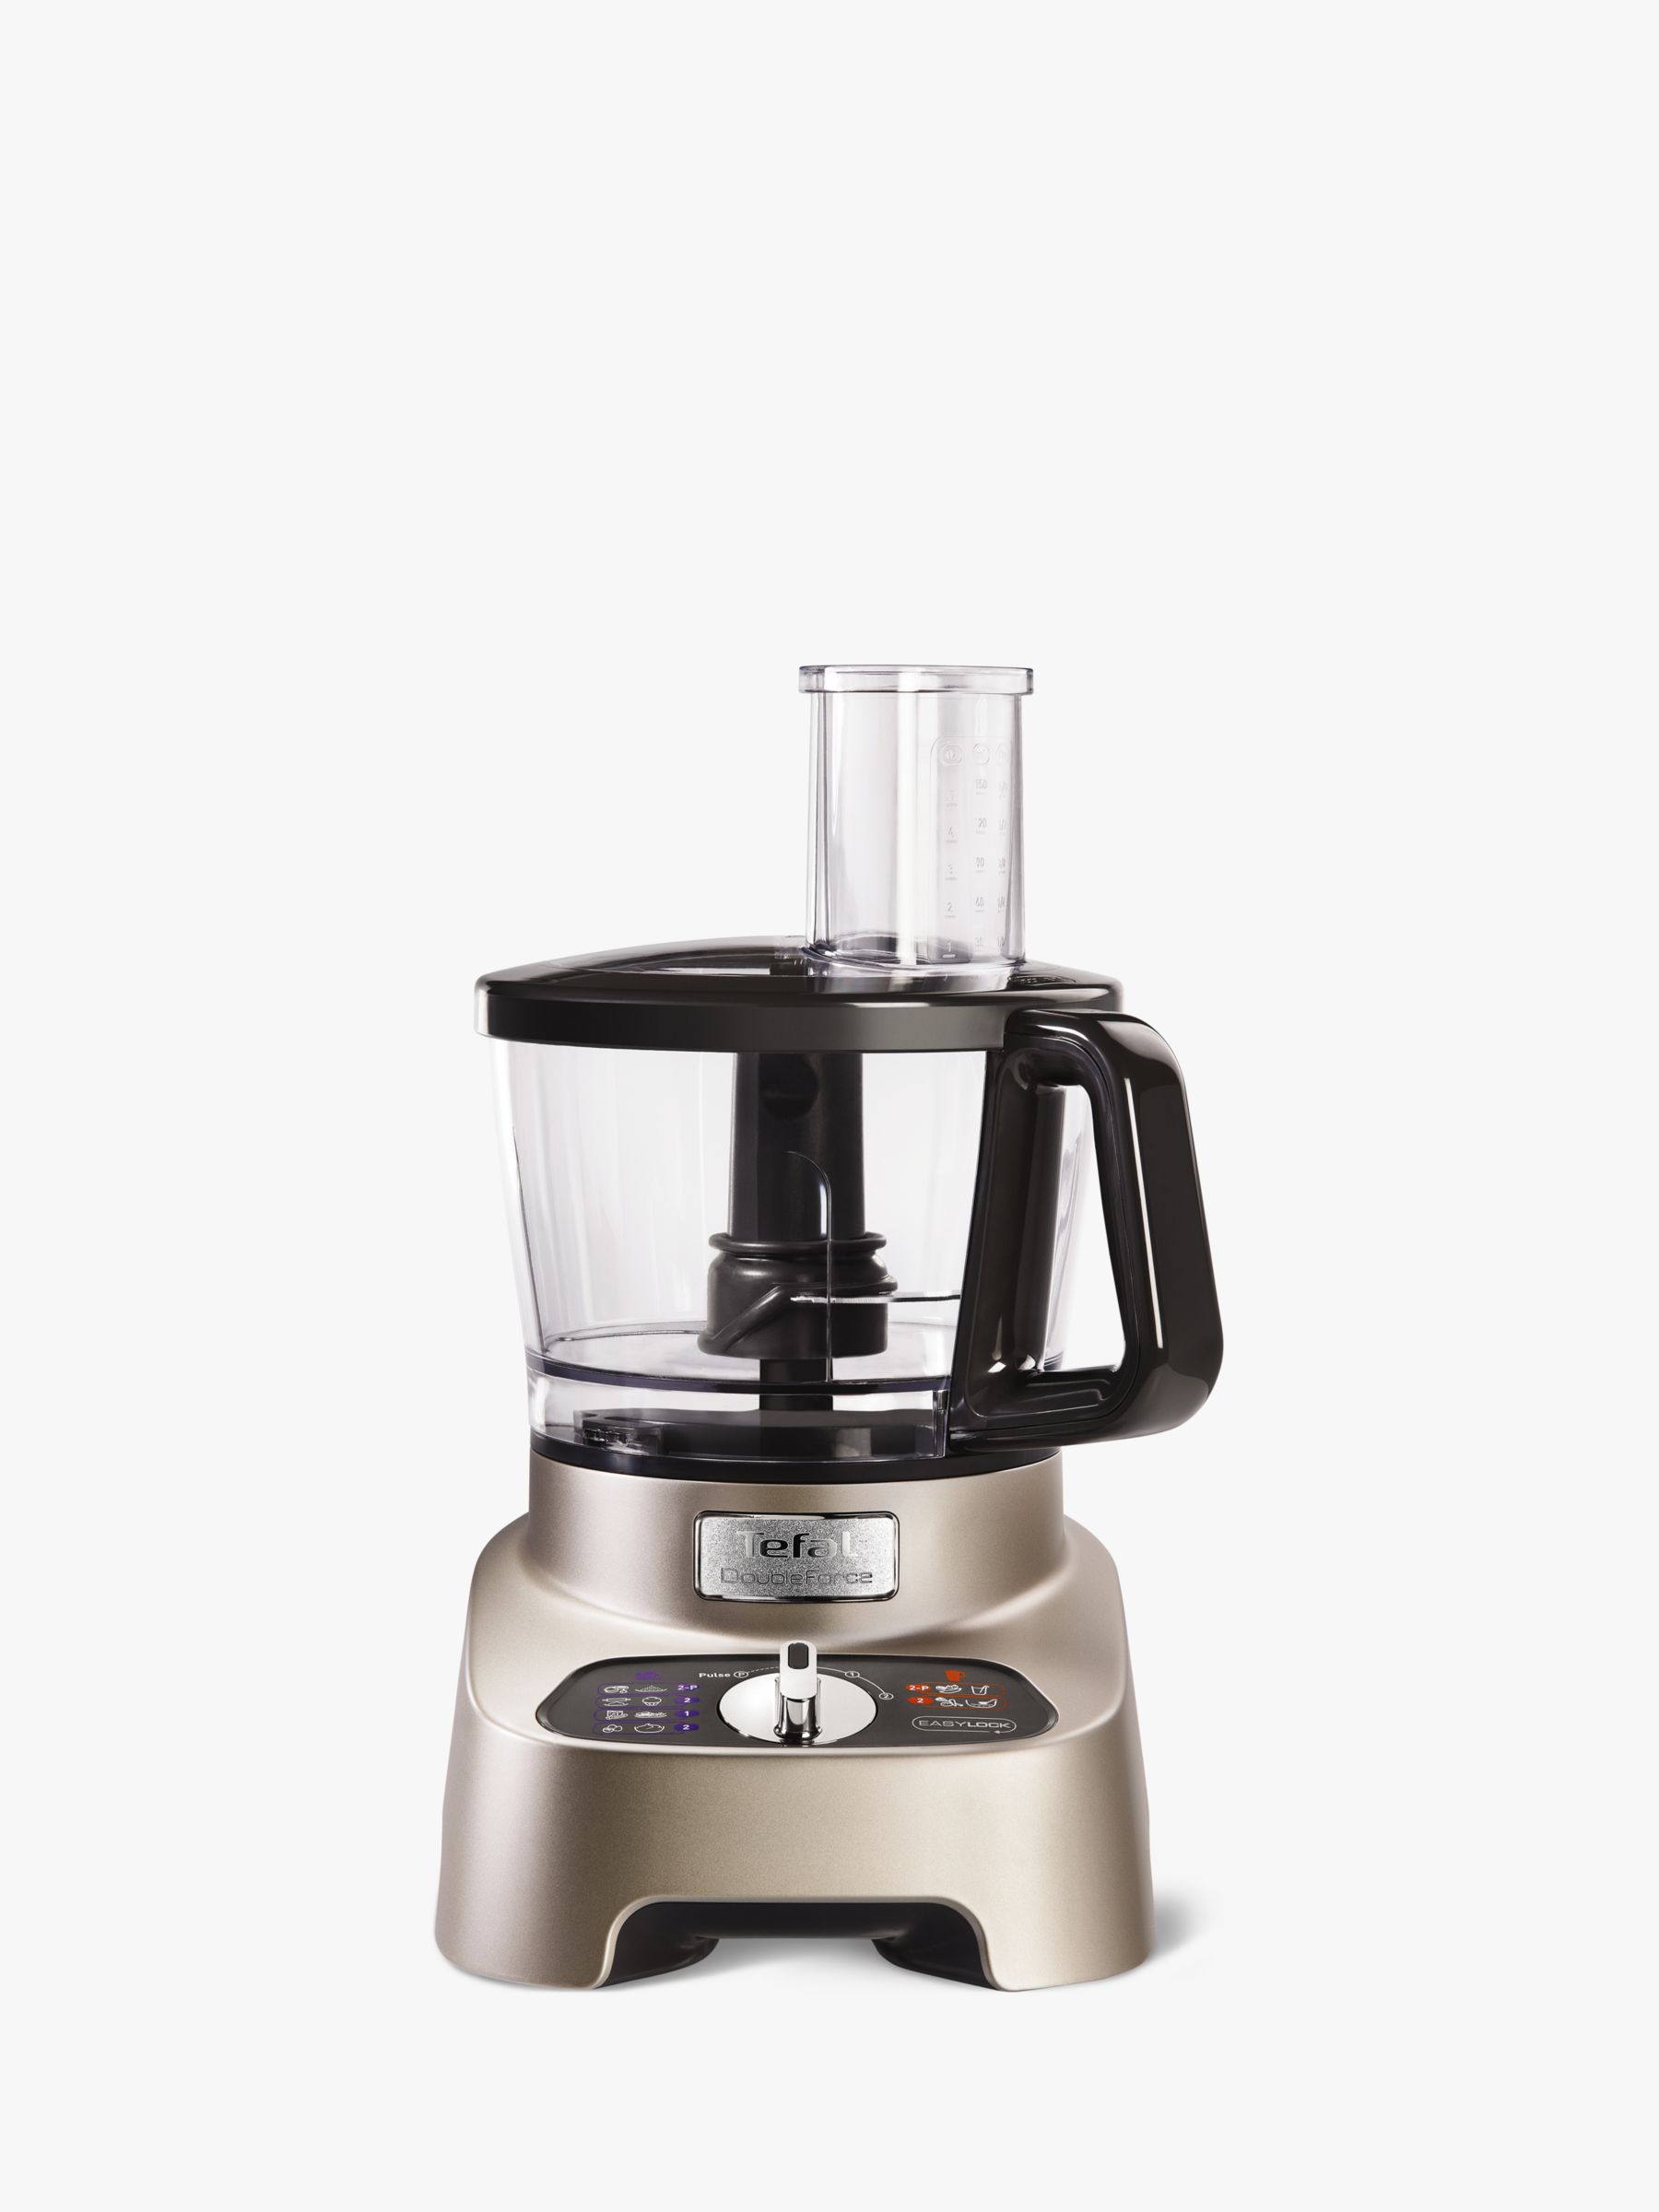 Tefal DO824H40 Double Force Pro Food Processor